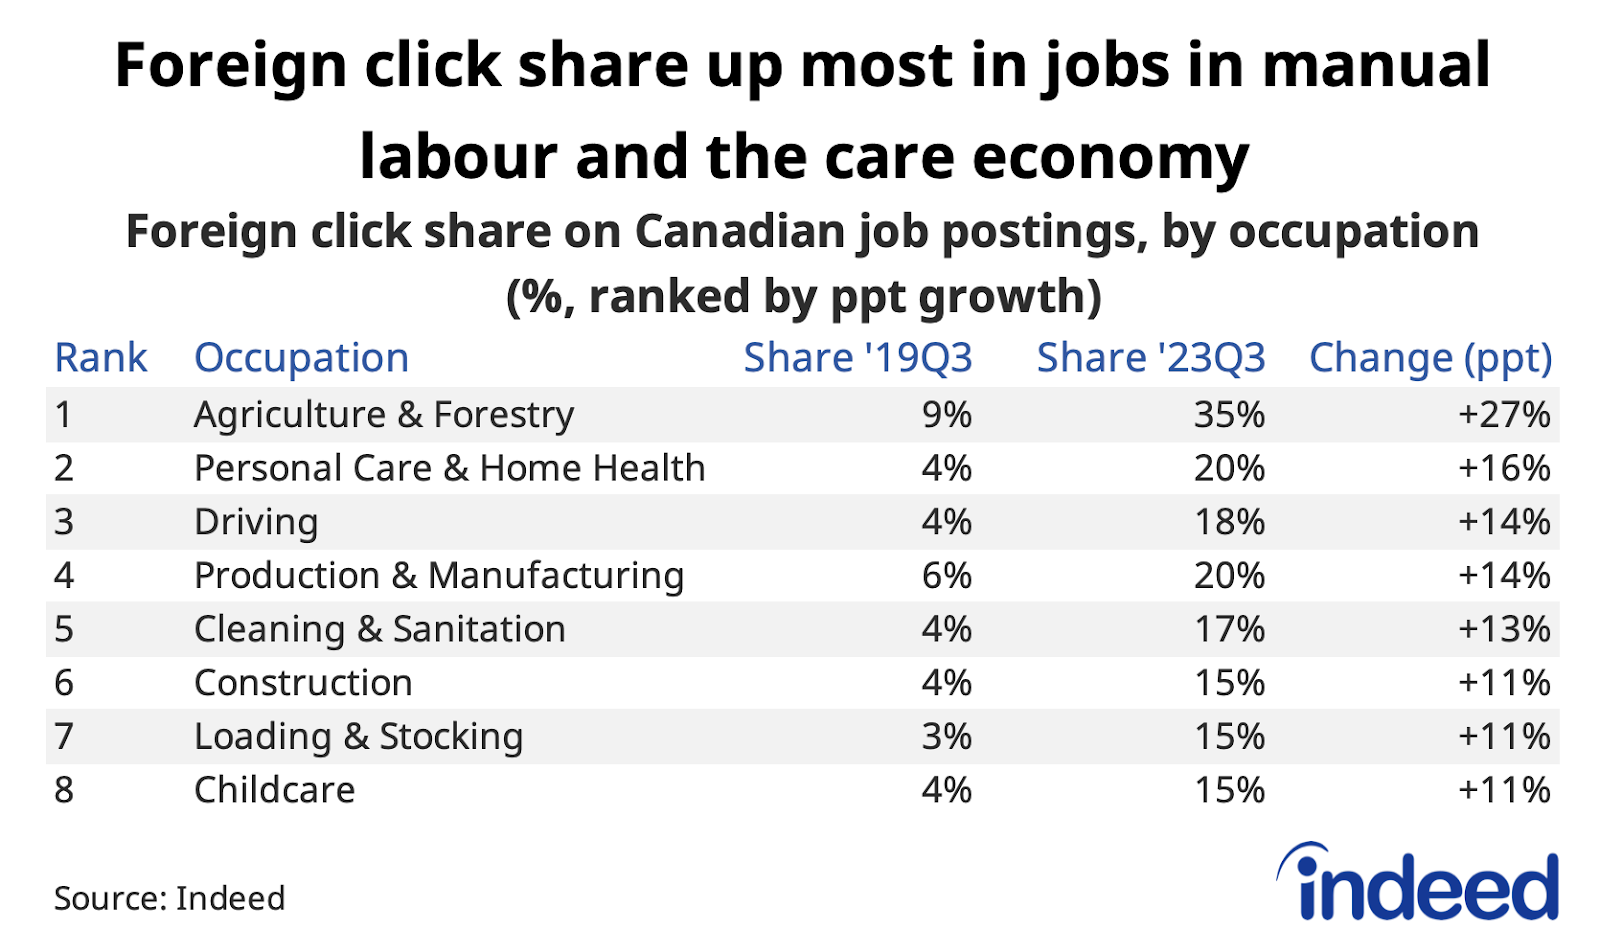 Table titled “Foreign click share up most in jobs in manual labour and care economy,” shows the foreign click share on Canadian job postings by different occupational sectors in 2019Q3 and 2023Q3, as well as the change in percentage points. The largest increases in foreign click share were in agriculture, personal care and home health, and driving. 